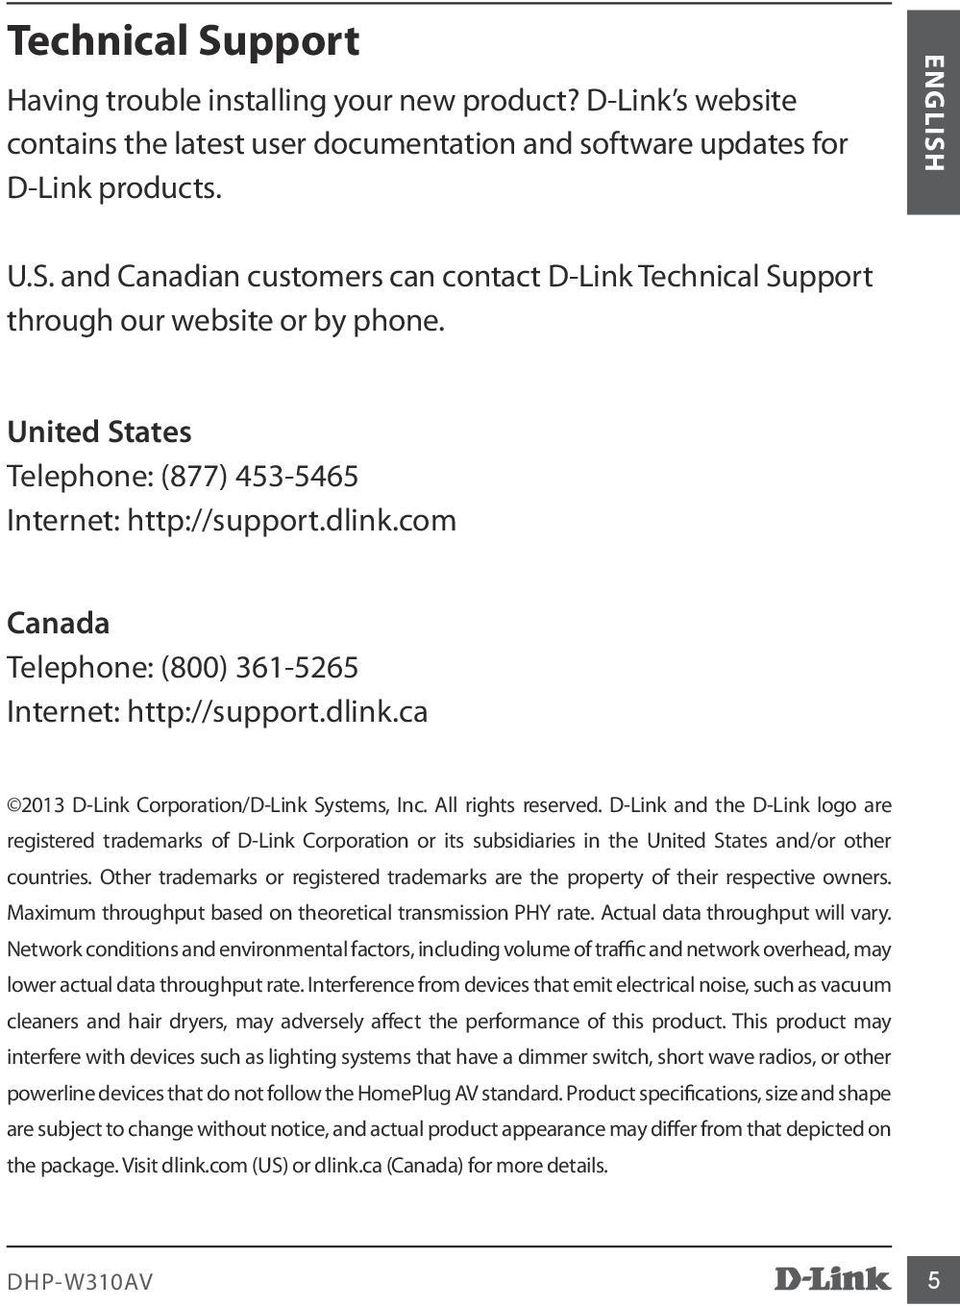 All rights reserved. D-Link and the D-Link logo are registered trademarks of D-Link Corporation or its subsidiaries in the United States and/or other countries.